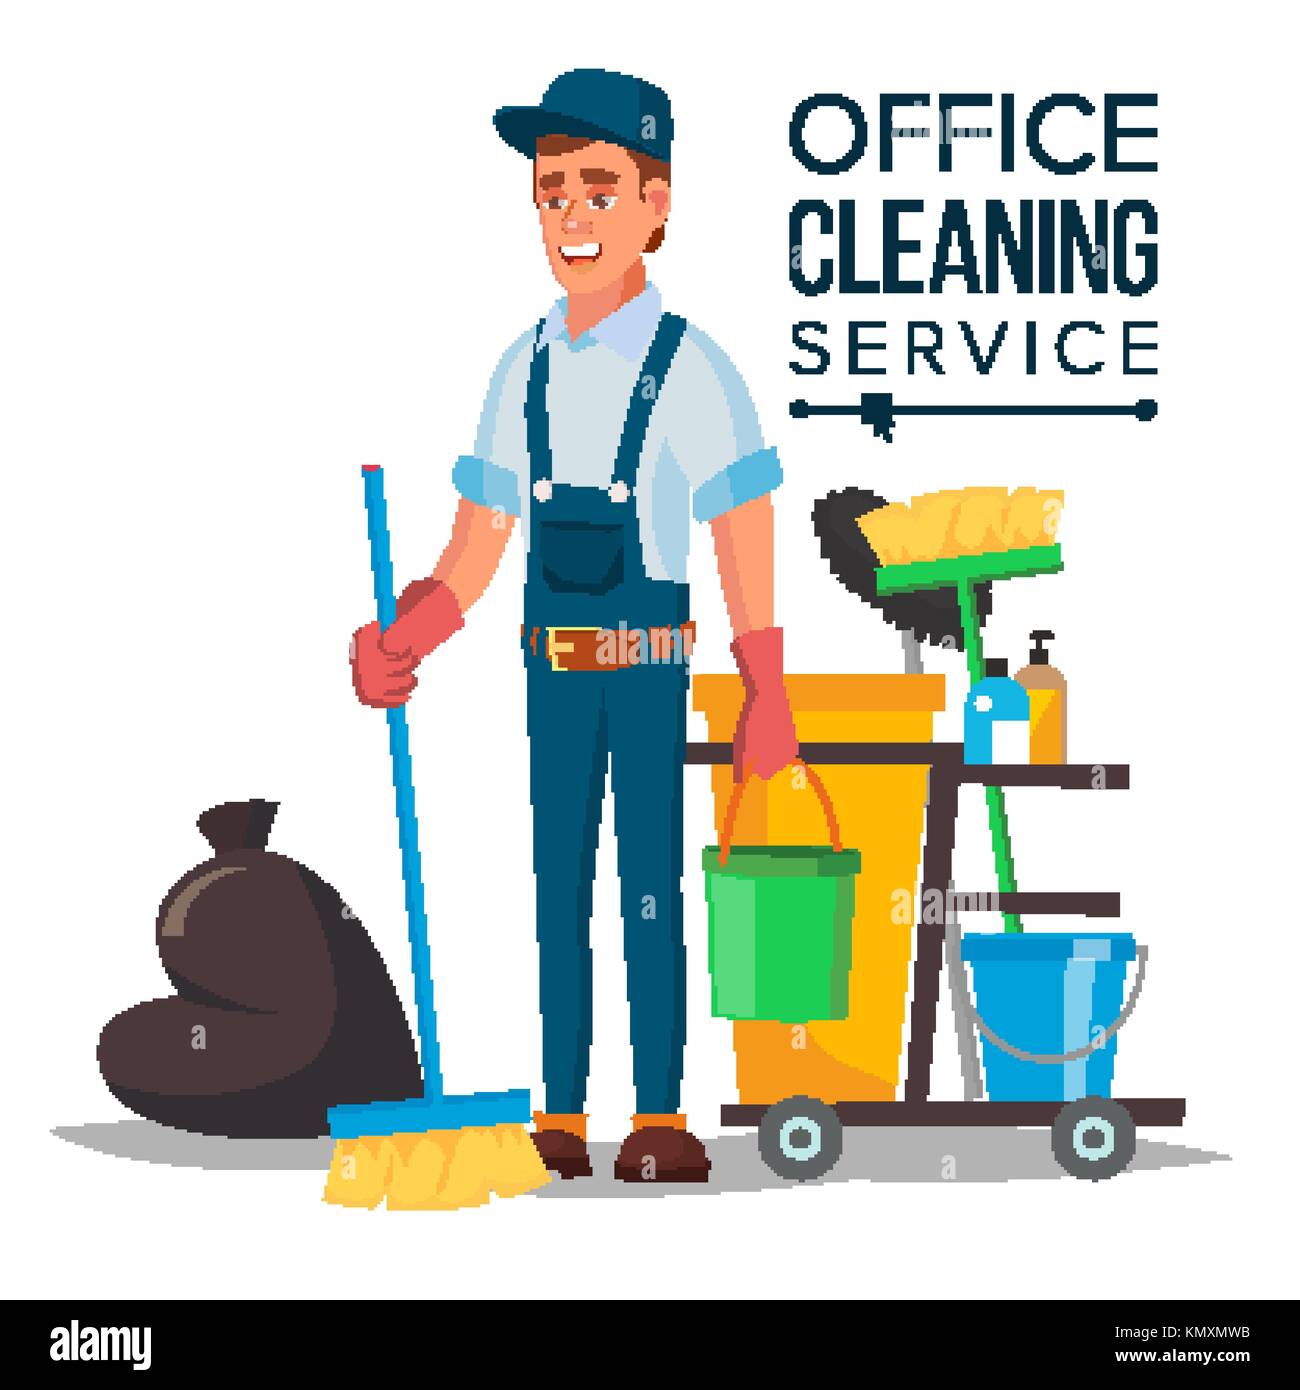 Office Cleaner Vector. Cleaner And Cleaning Equipment. Sweeper The ...